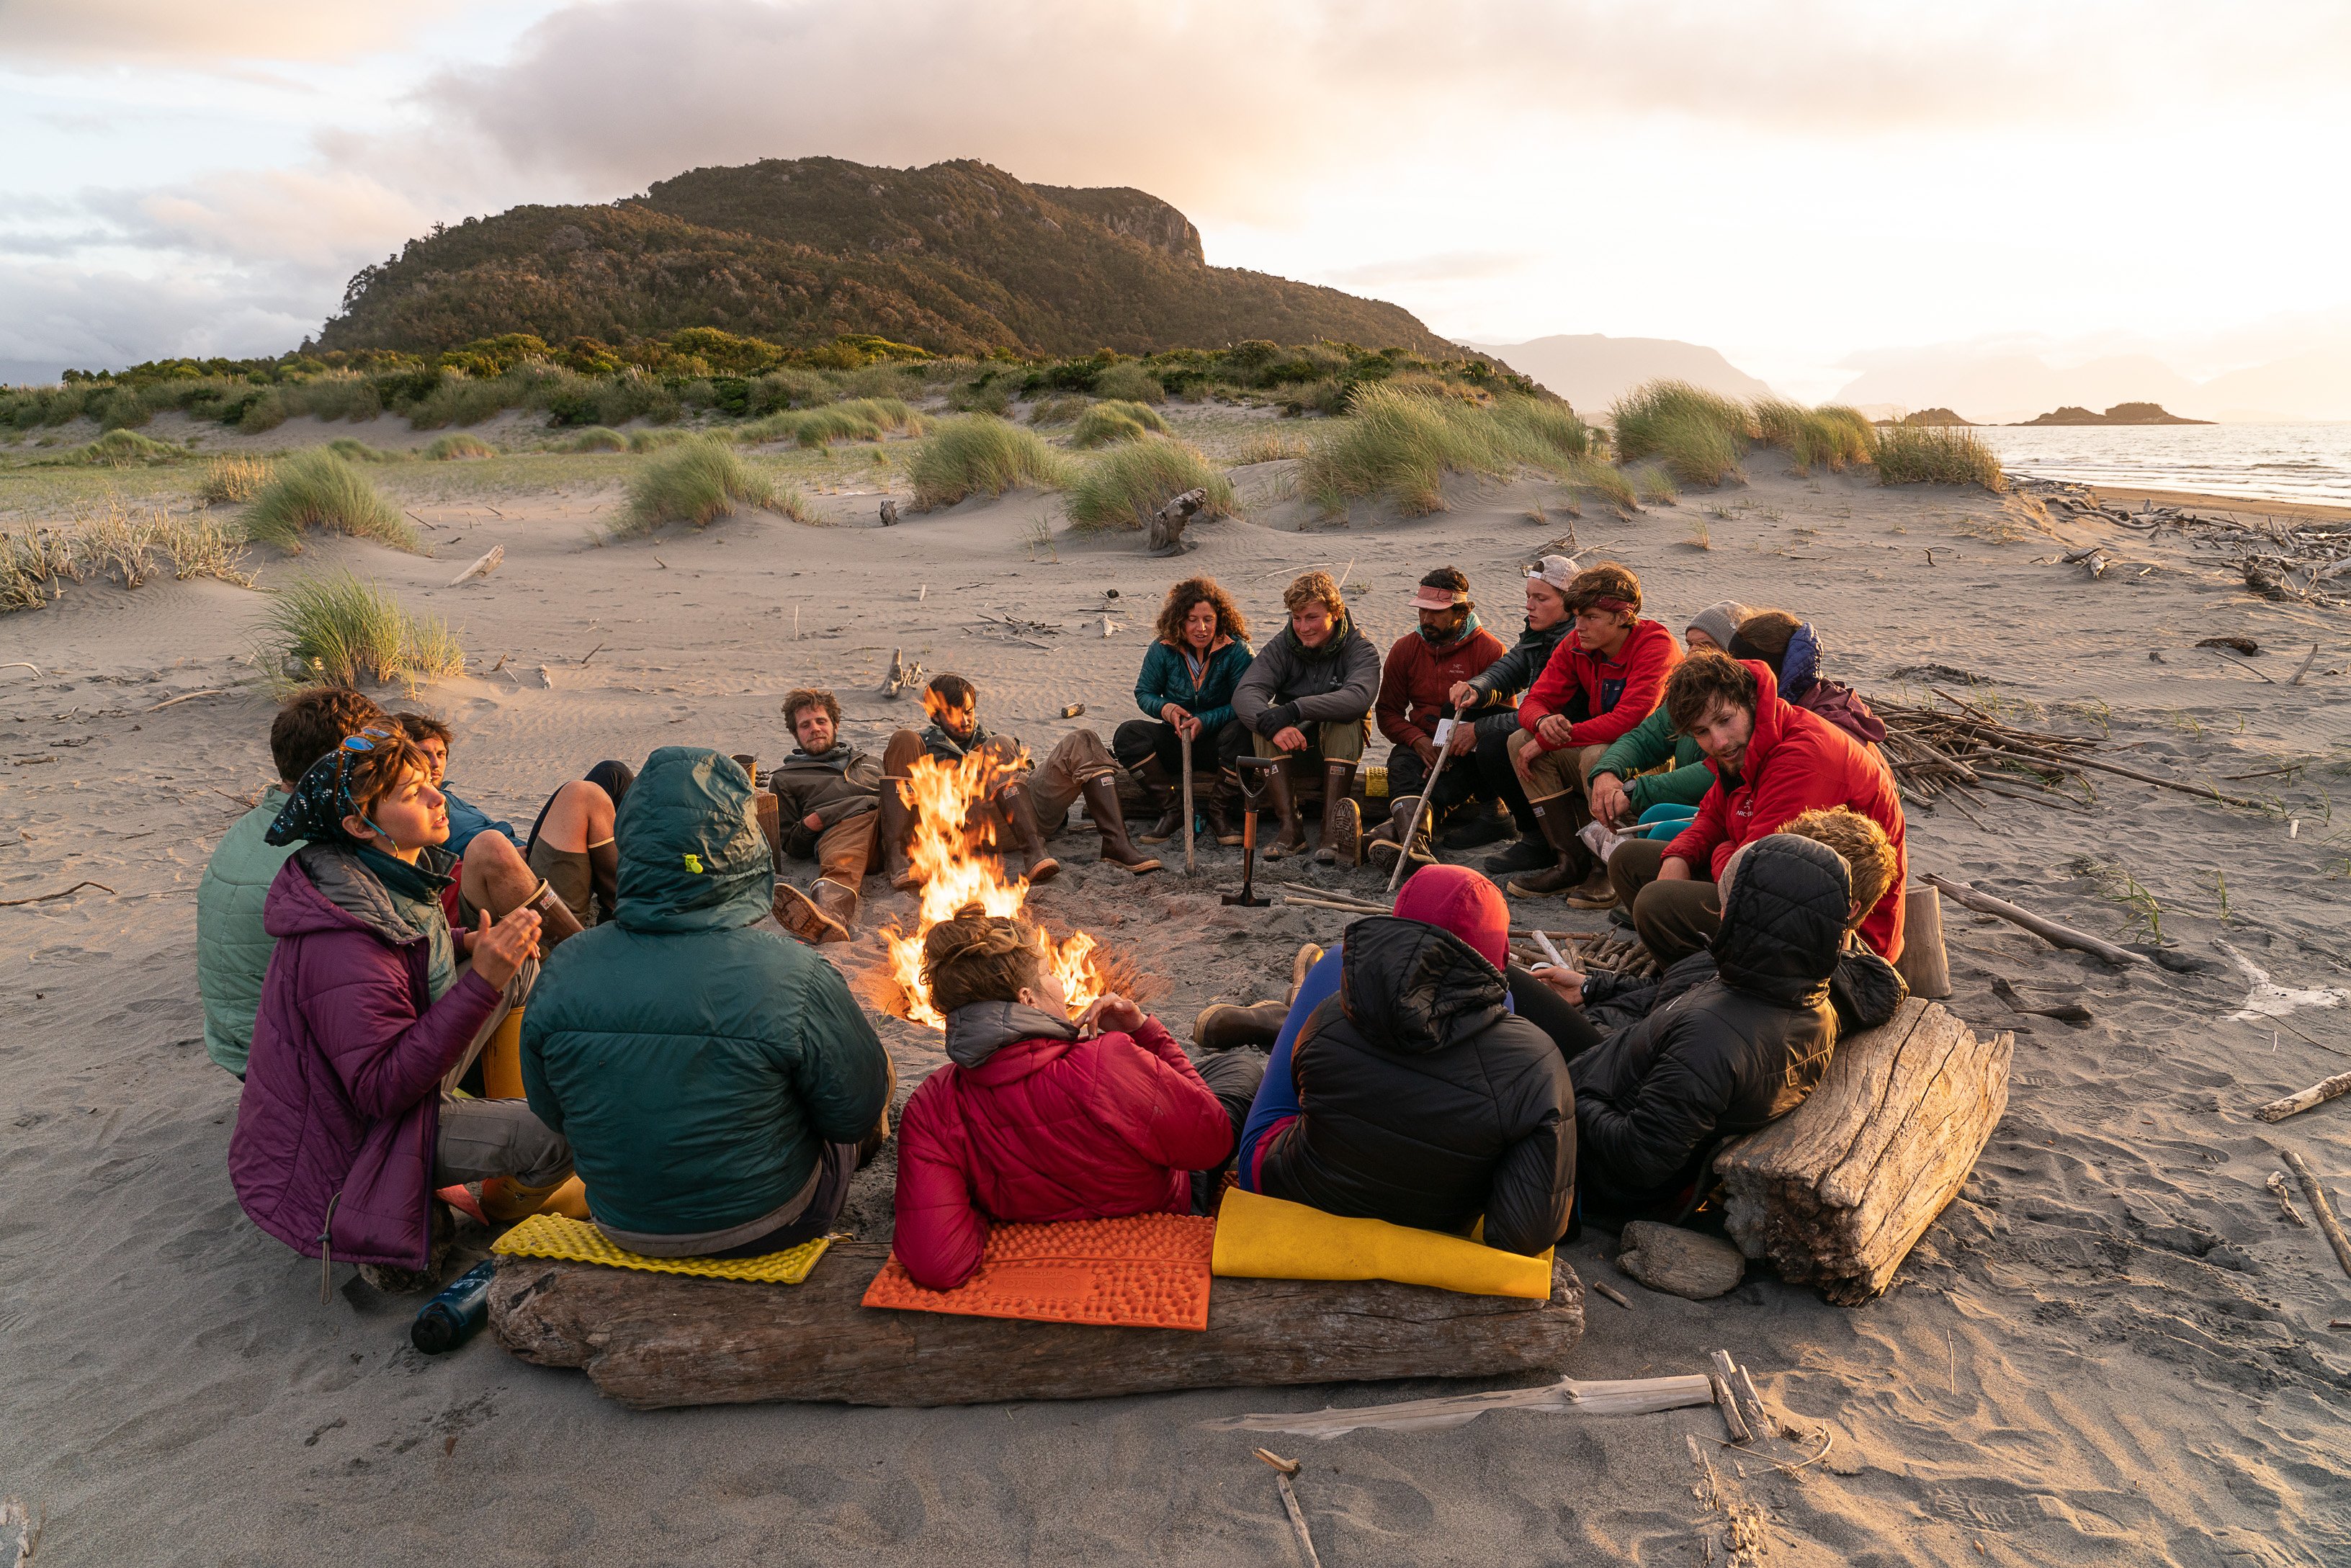 A group of people sit around a campfire on a beach. The sun is setting in the background